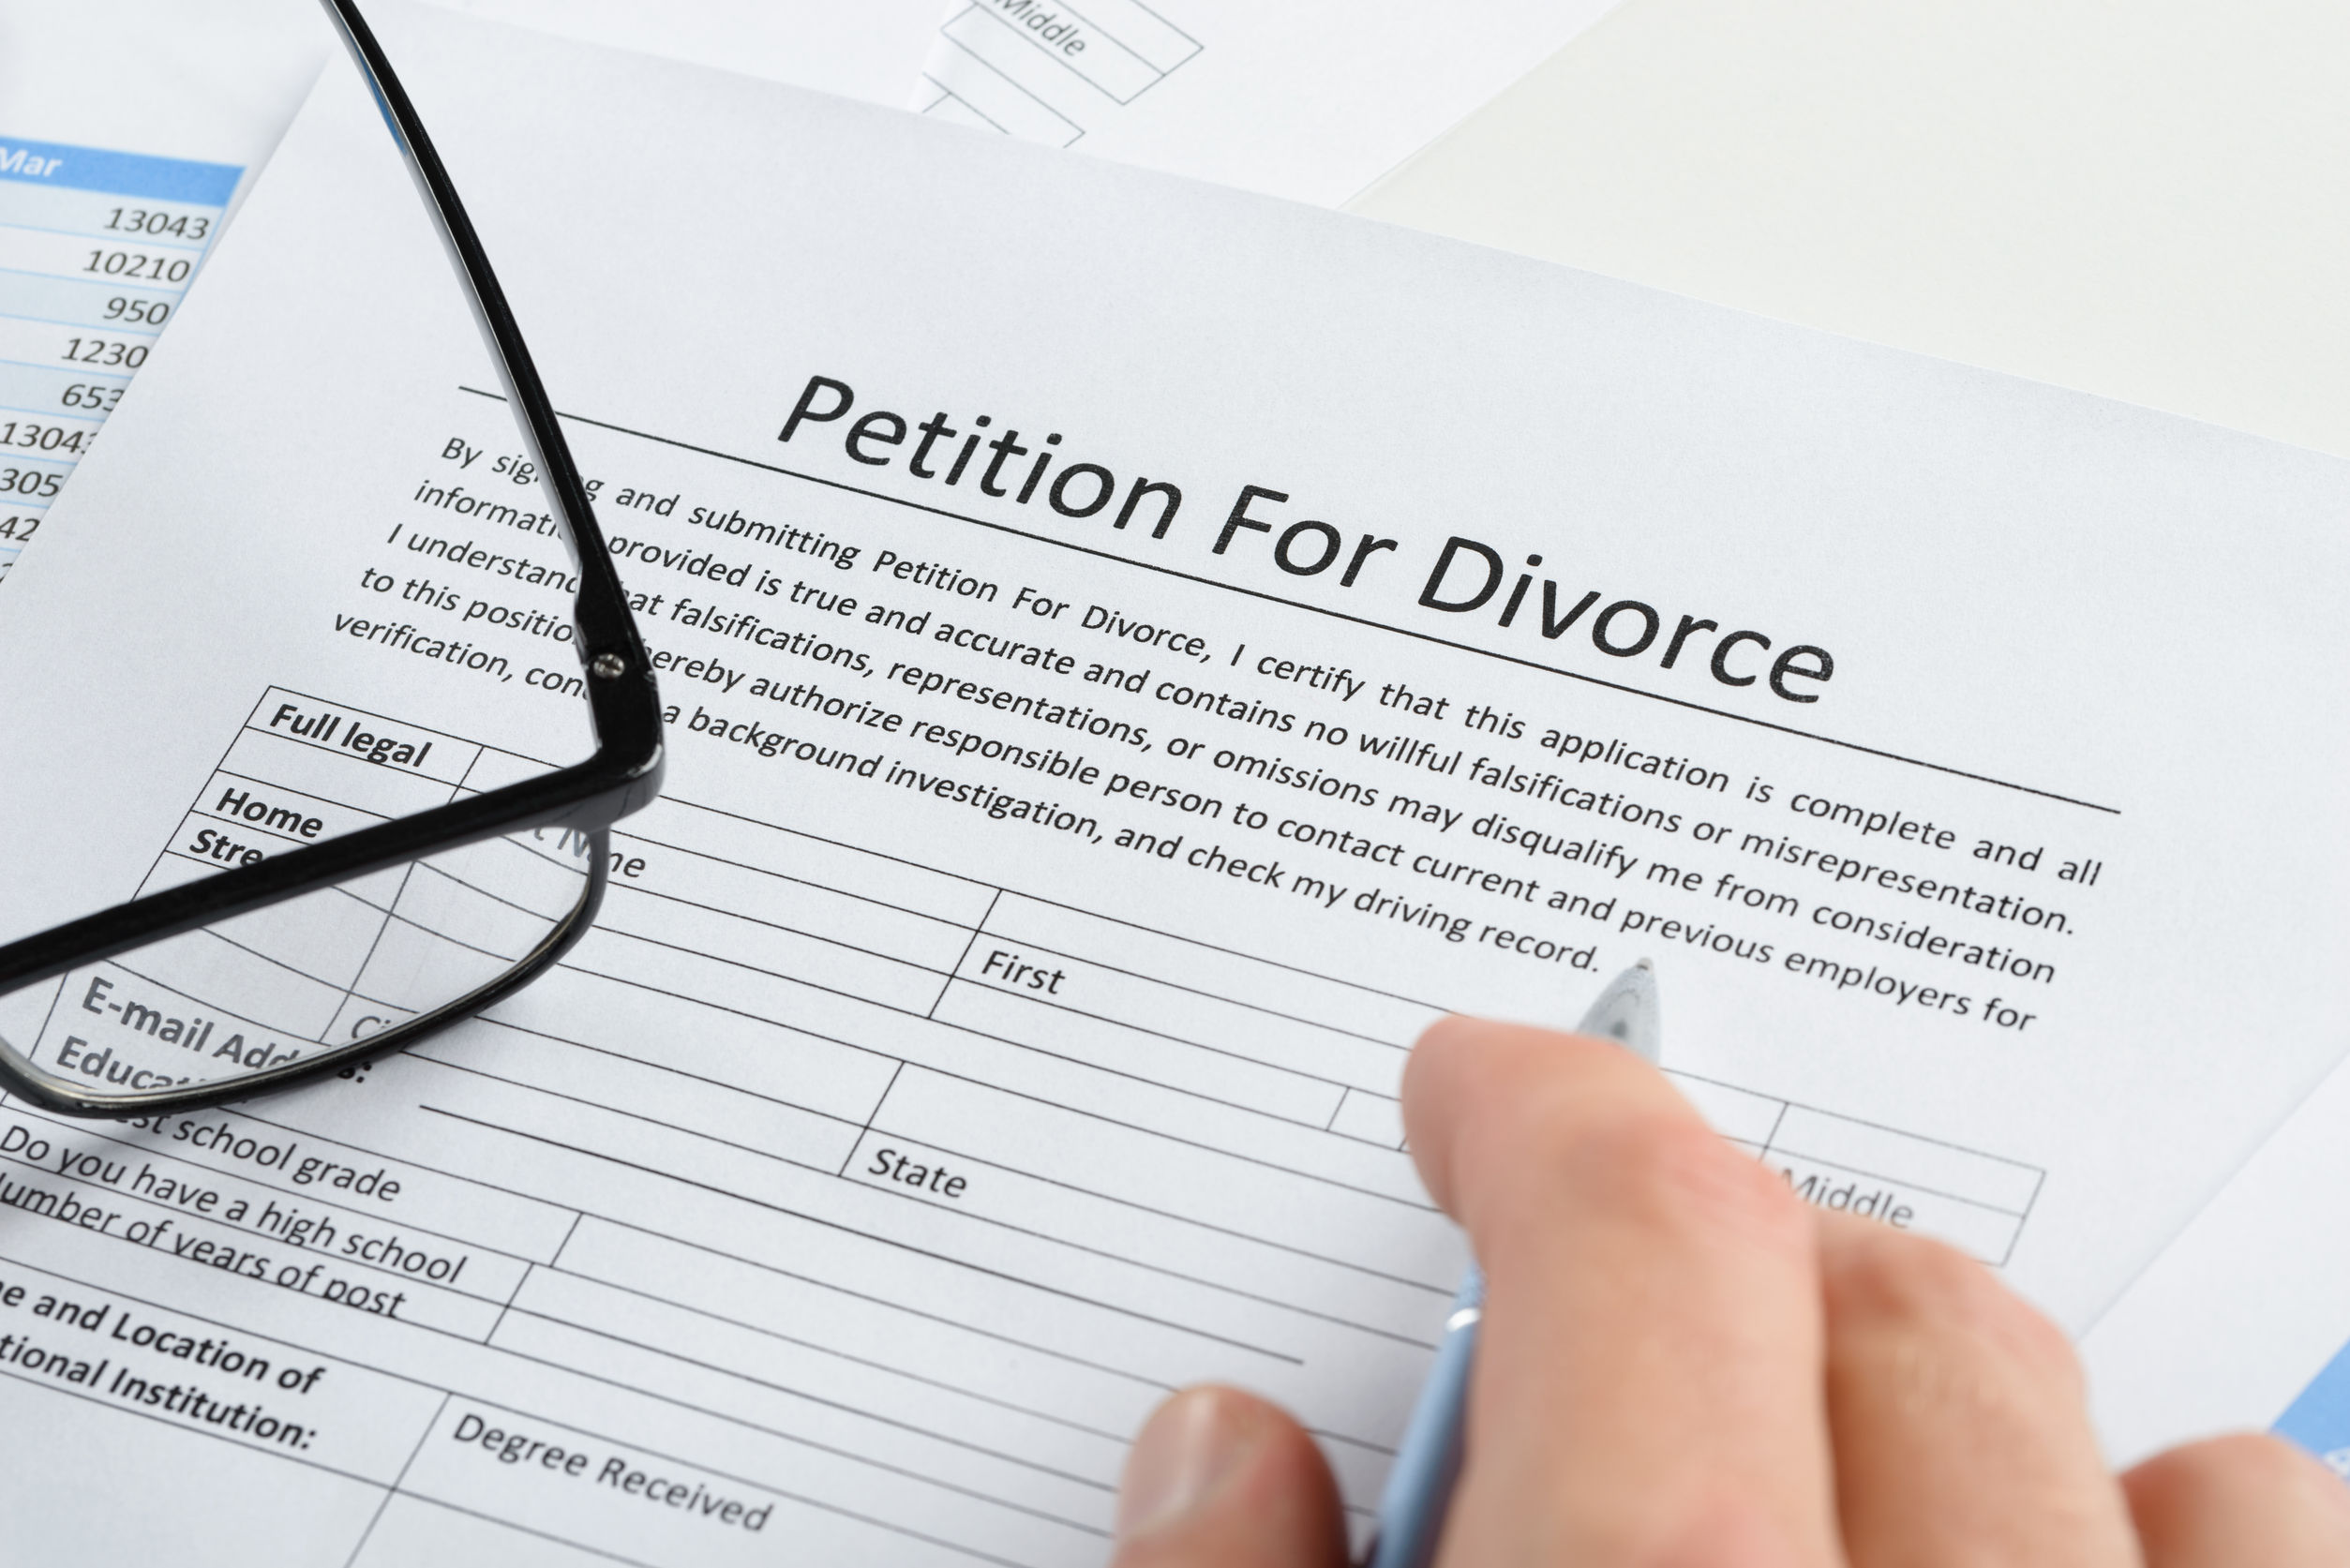 Why can’t we use divorce forms online?